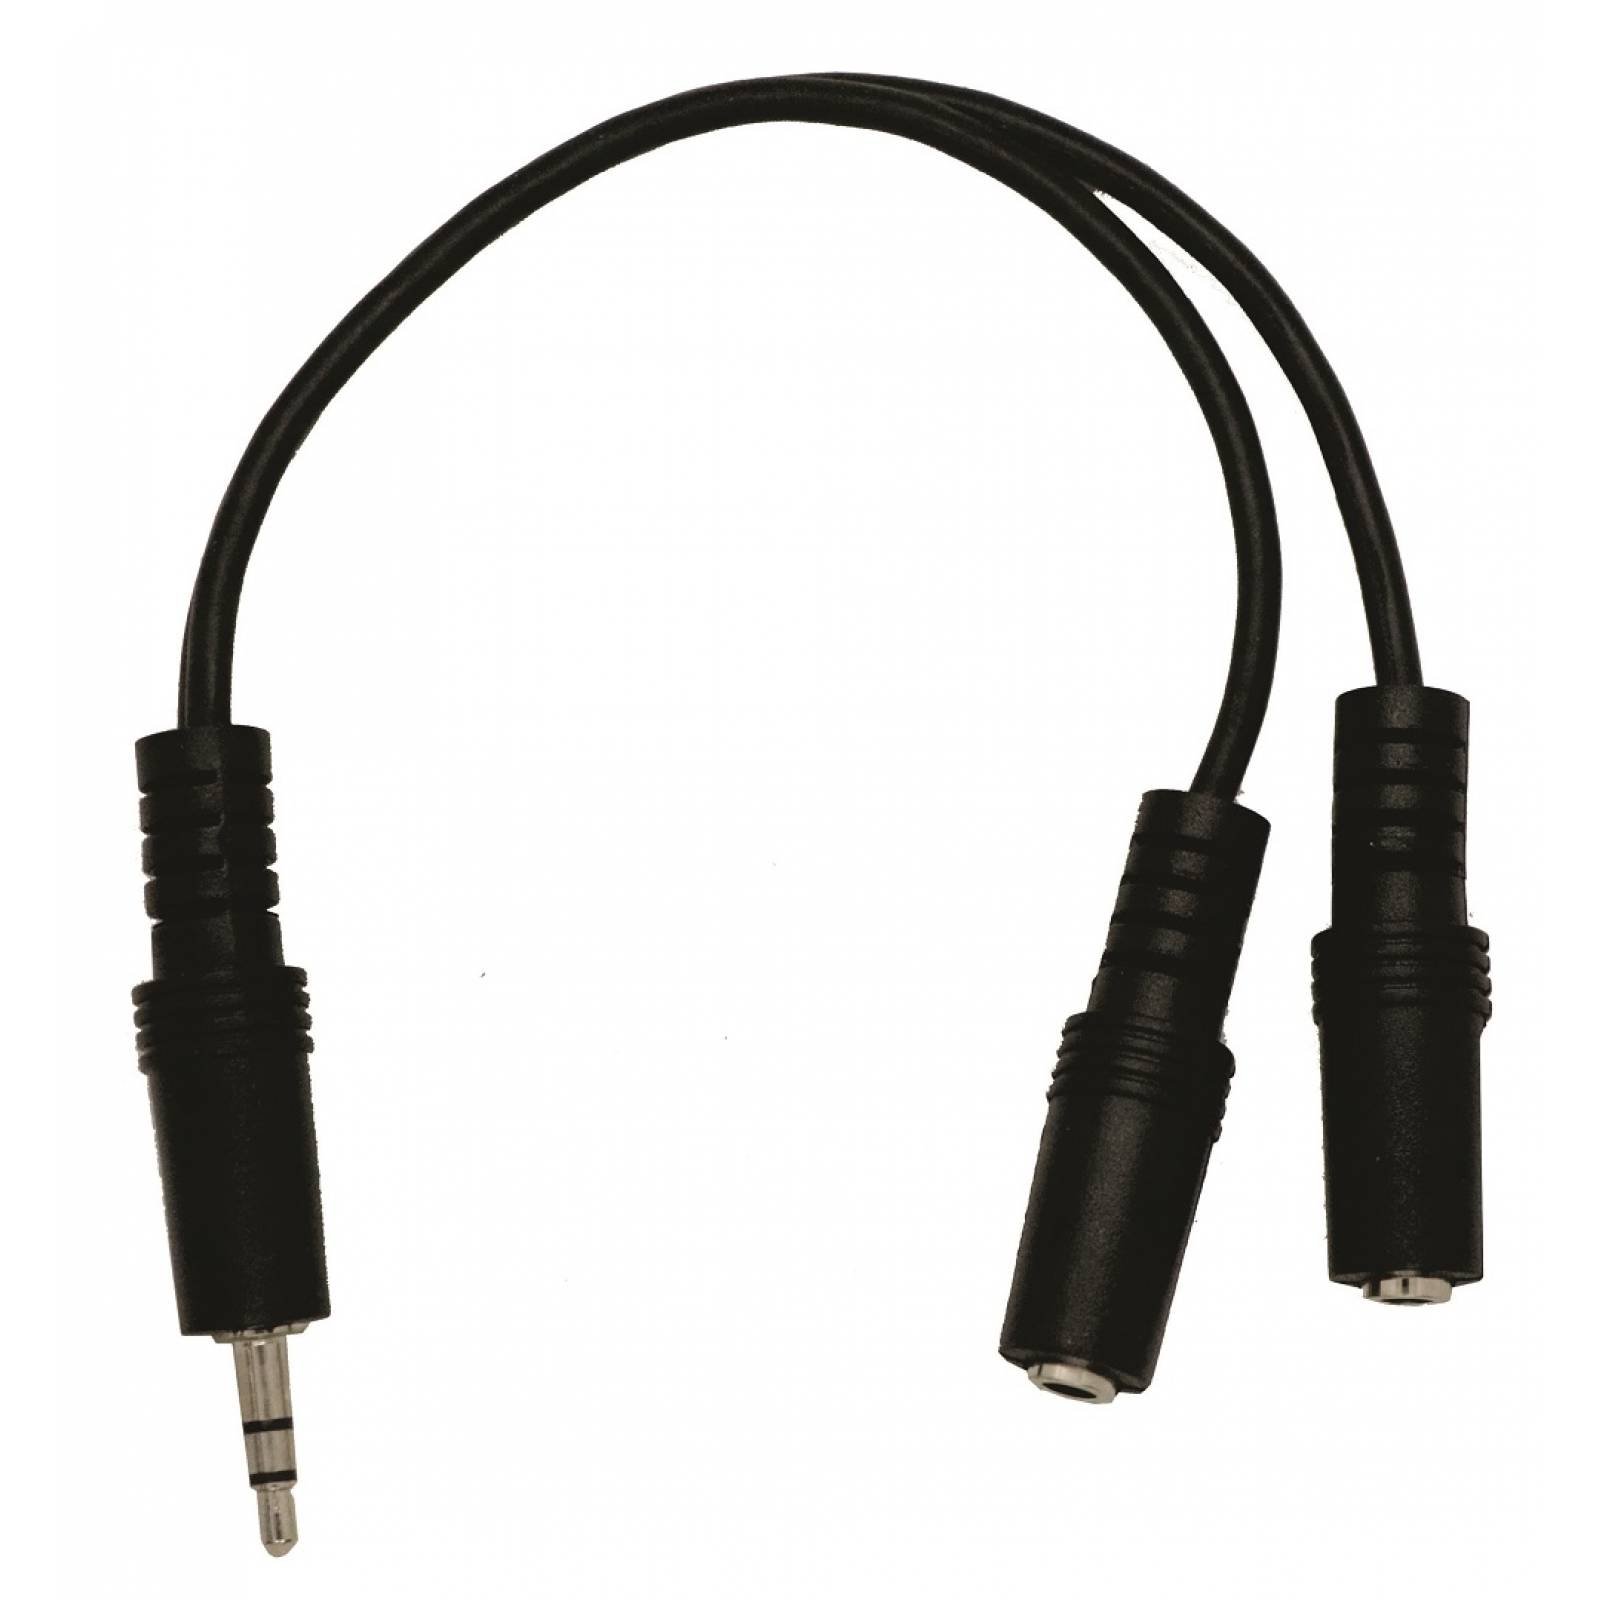 EXTENSION Y 2 JACK 3.5 STEREO A 1 PLUG 3.5 STEREO 15CM 